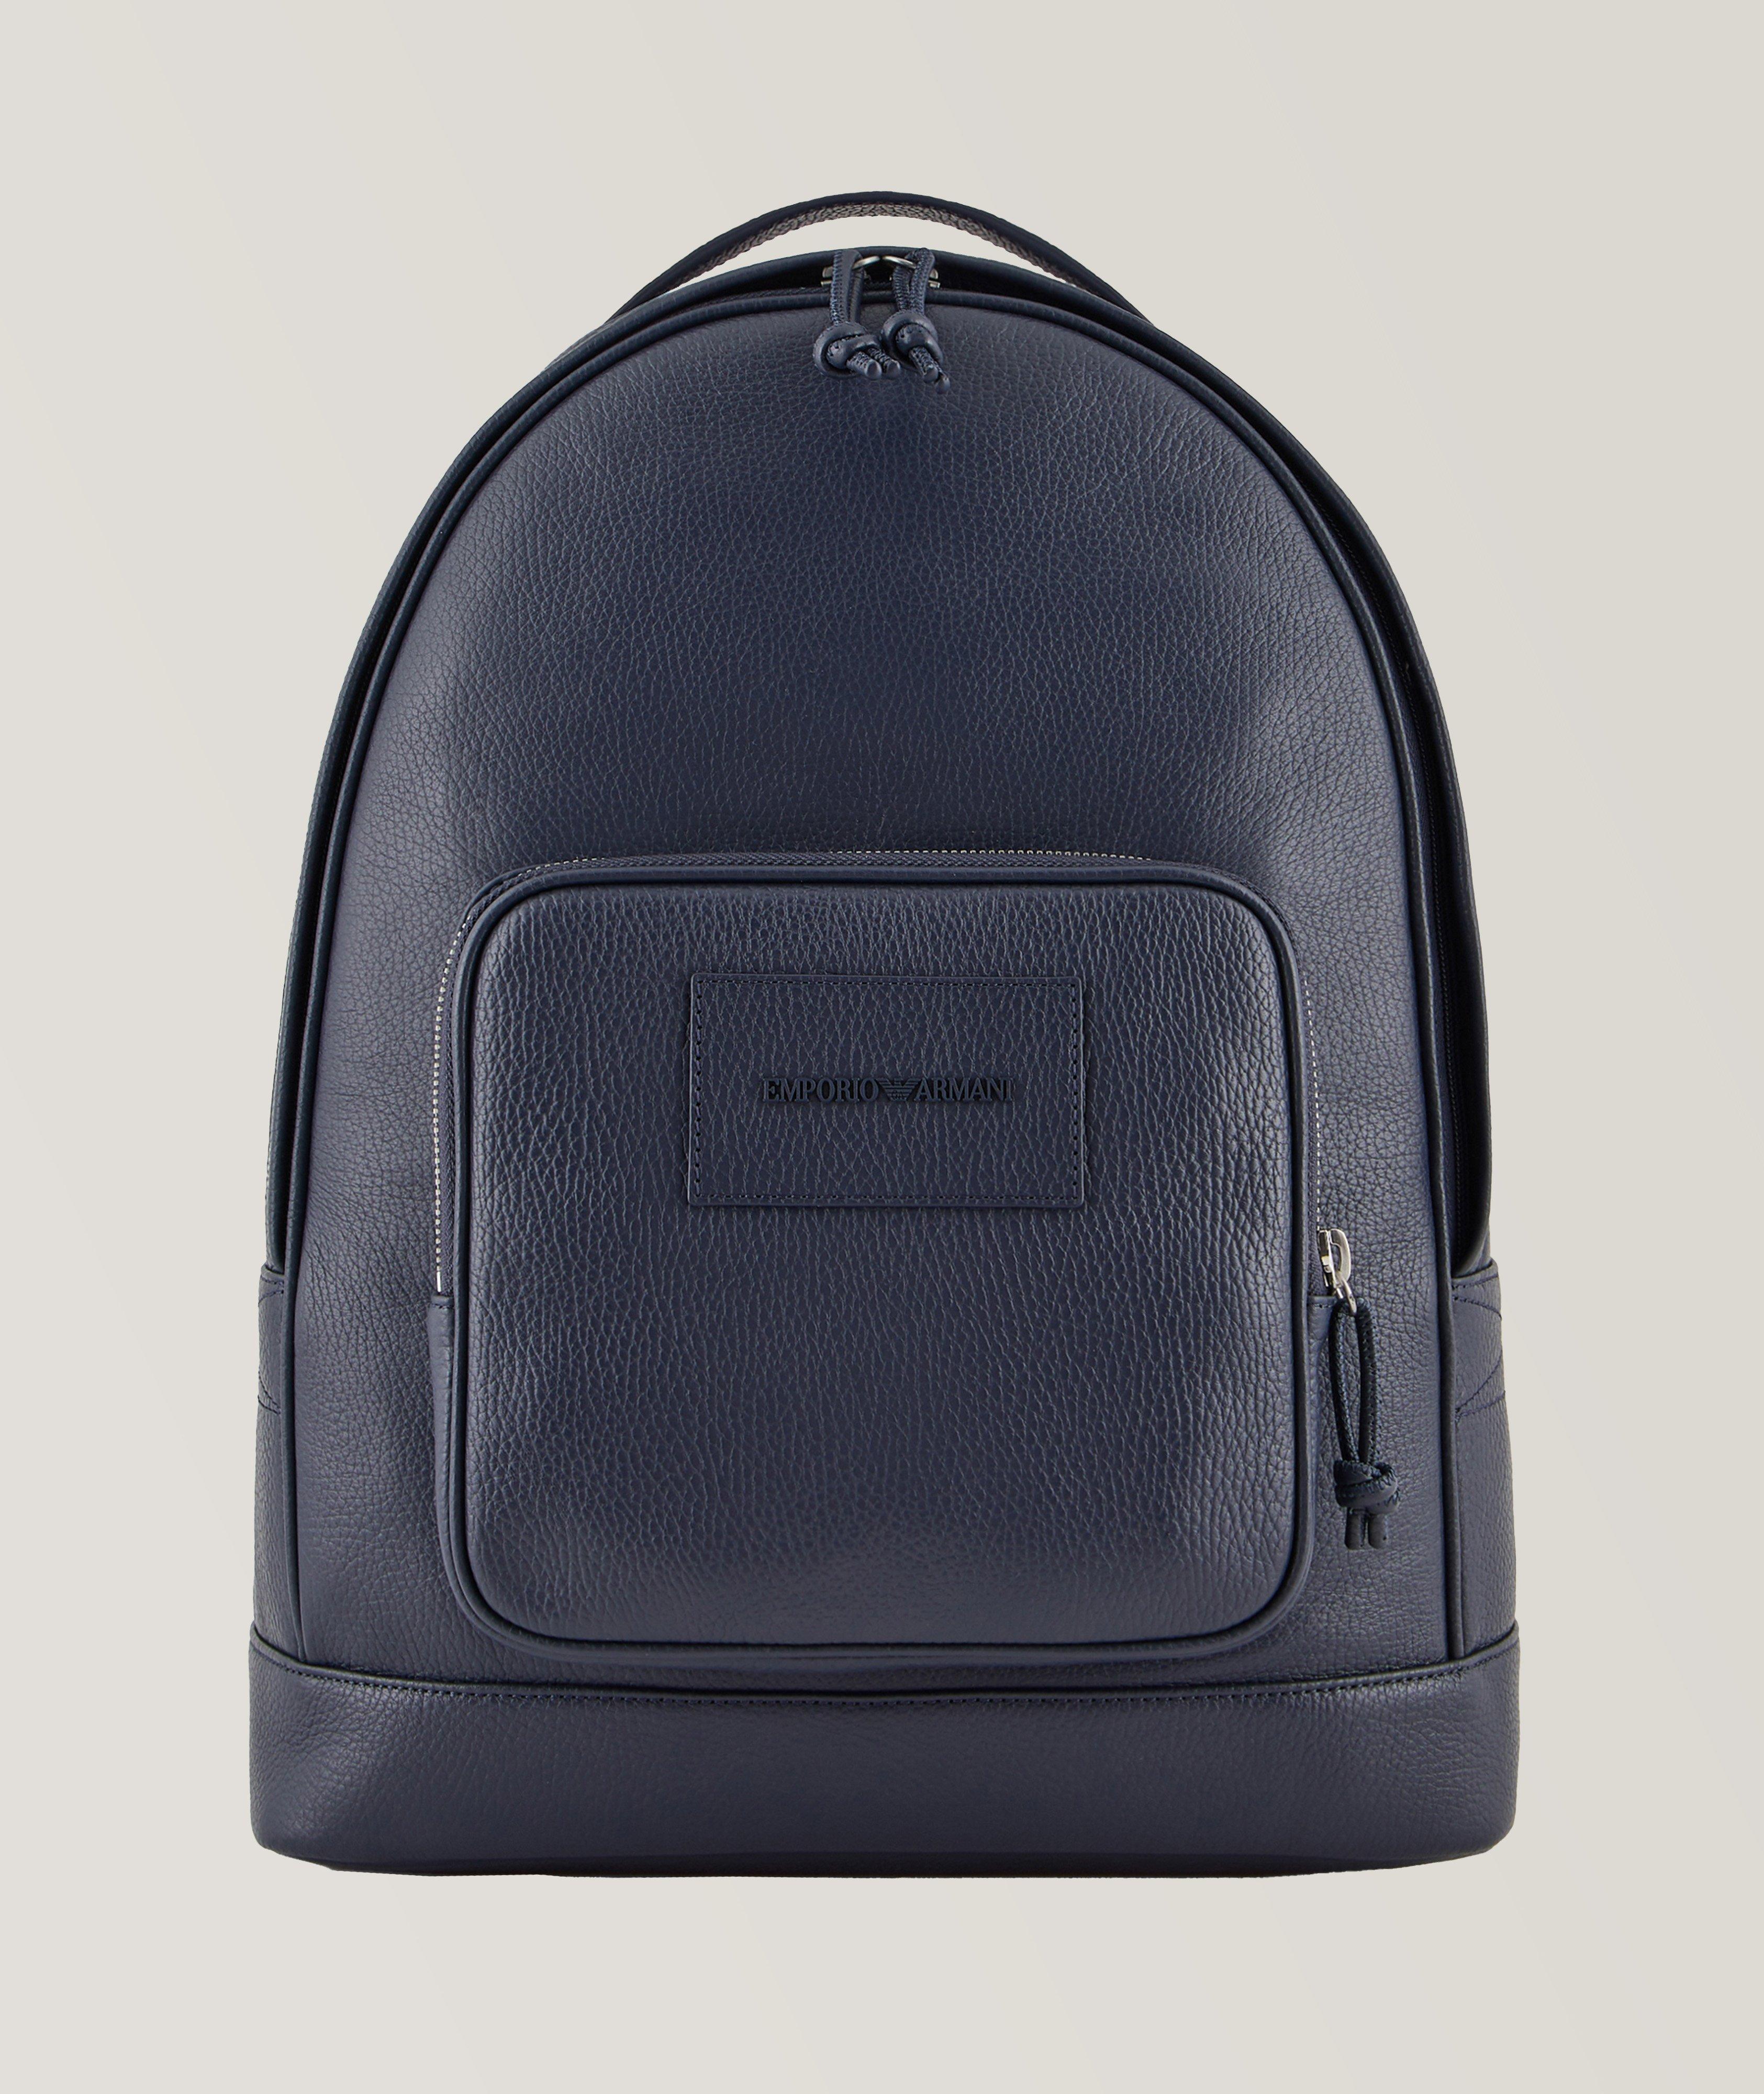 Logo Embossed Leather Backpack image 2